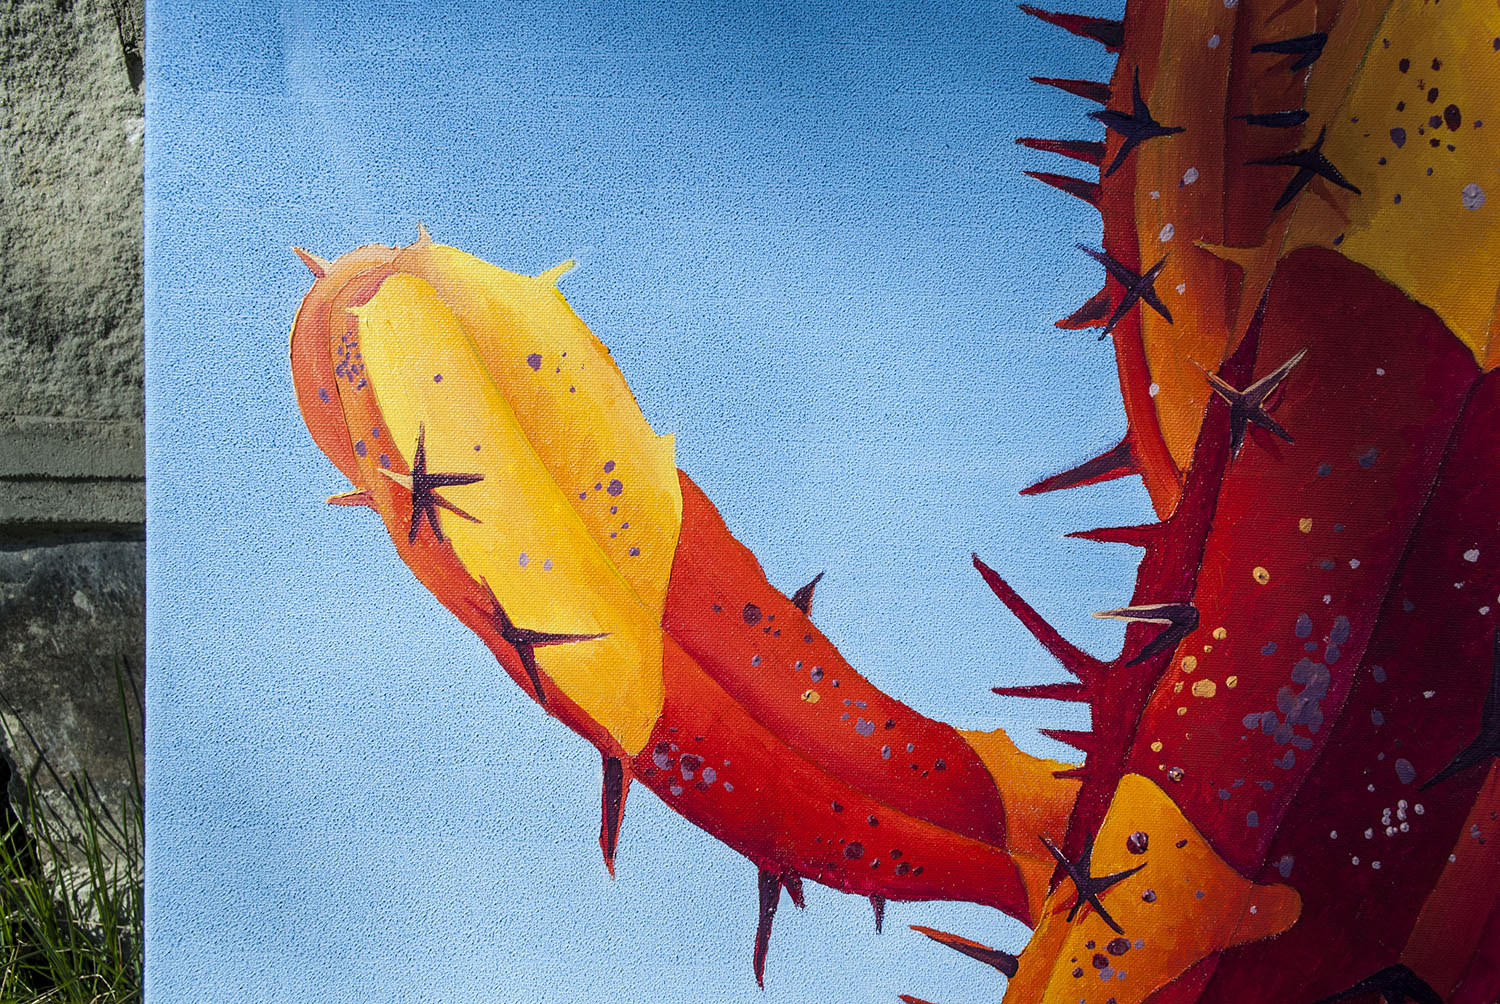 Detail of the spikes and cactus branches on Big Orange on Blue - beautiful cactus painting made in 2021 by Dominic Virtosu